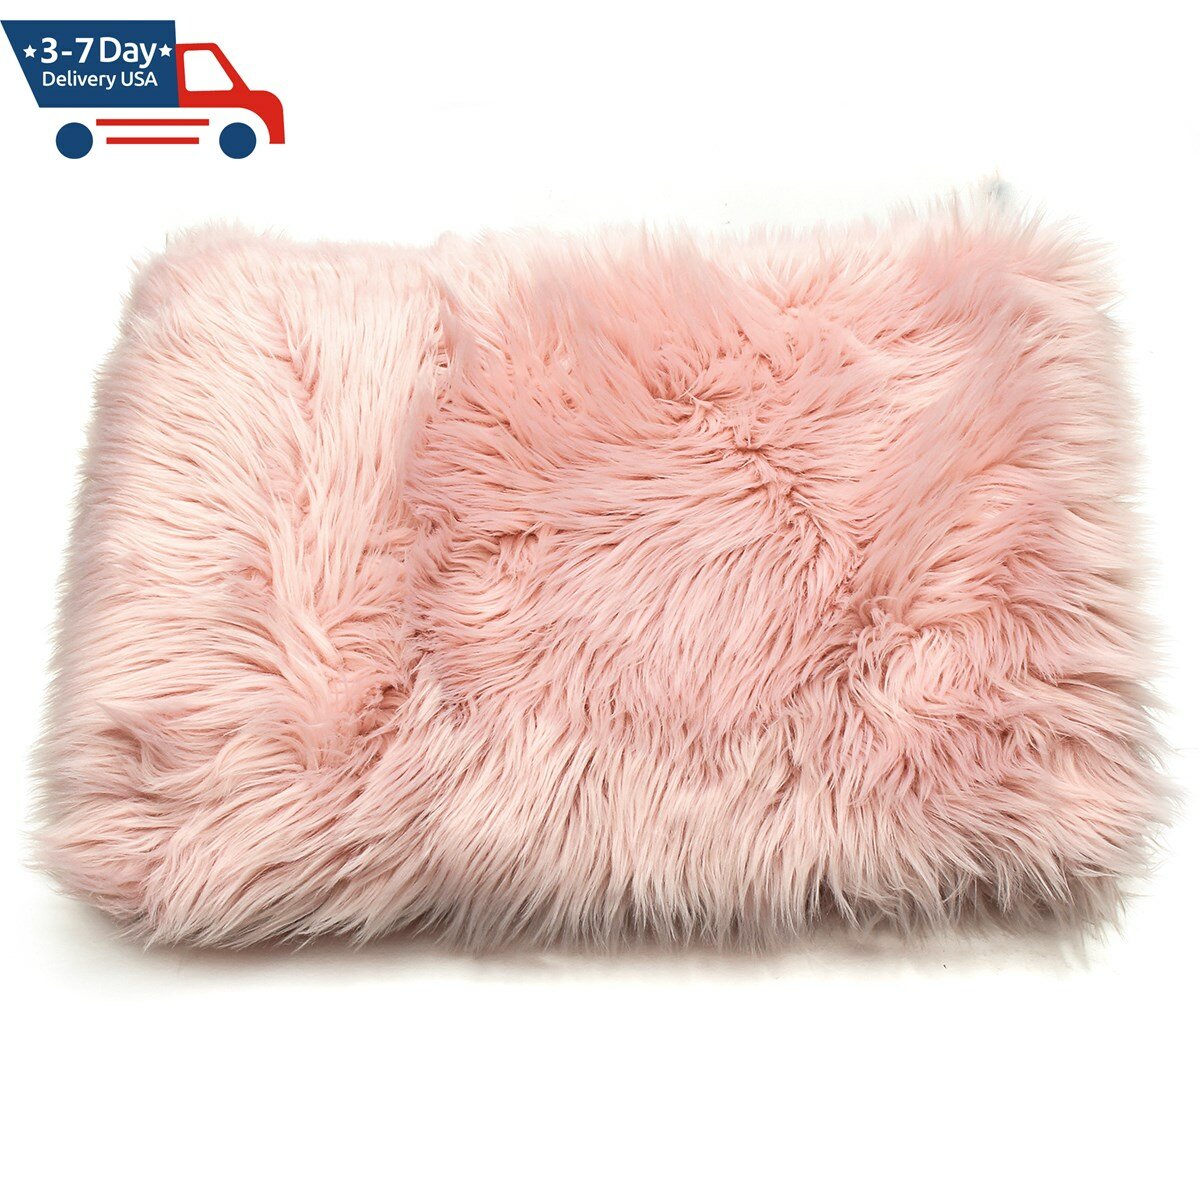 48x32 inch Faux Fur Fluffy Wool Rug Mat Hairy Rectangle Carpet Shaggy Area Rug Bedroom Living Dining Room Carpet Warm Mat Sofas Chair Floor Cushions